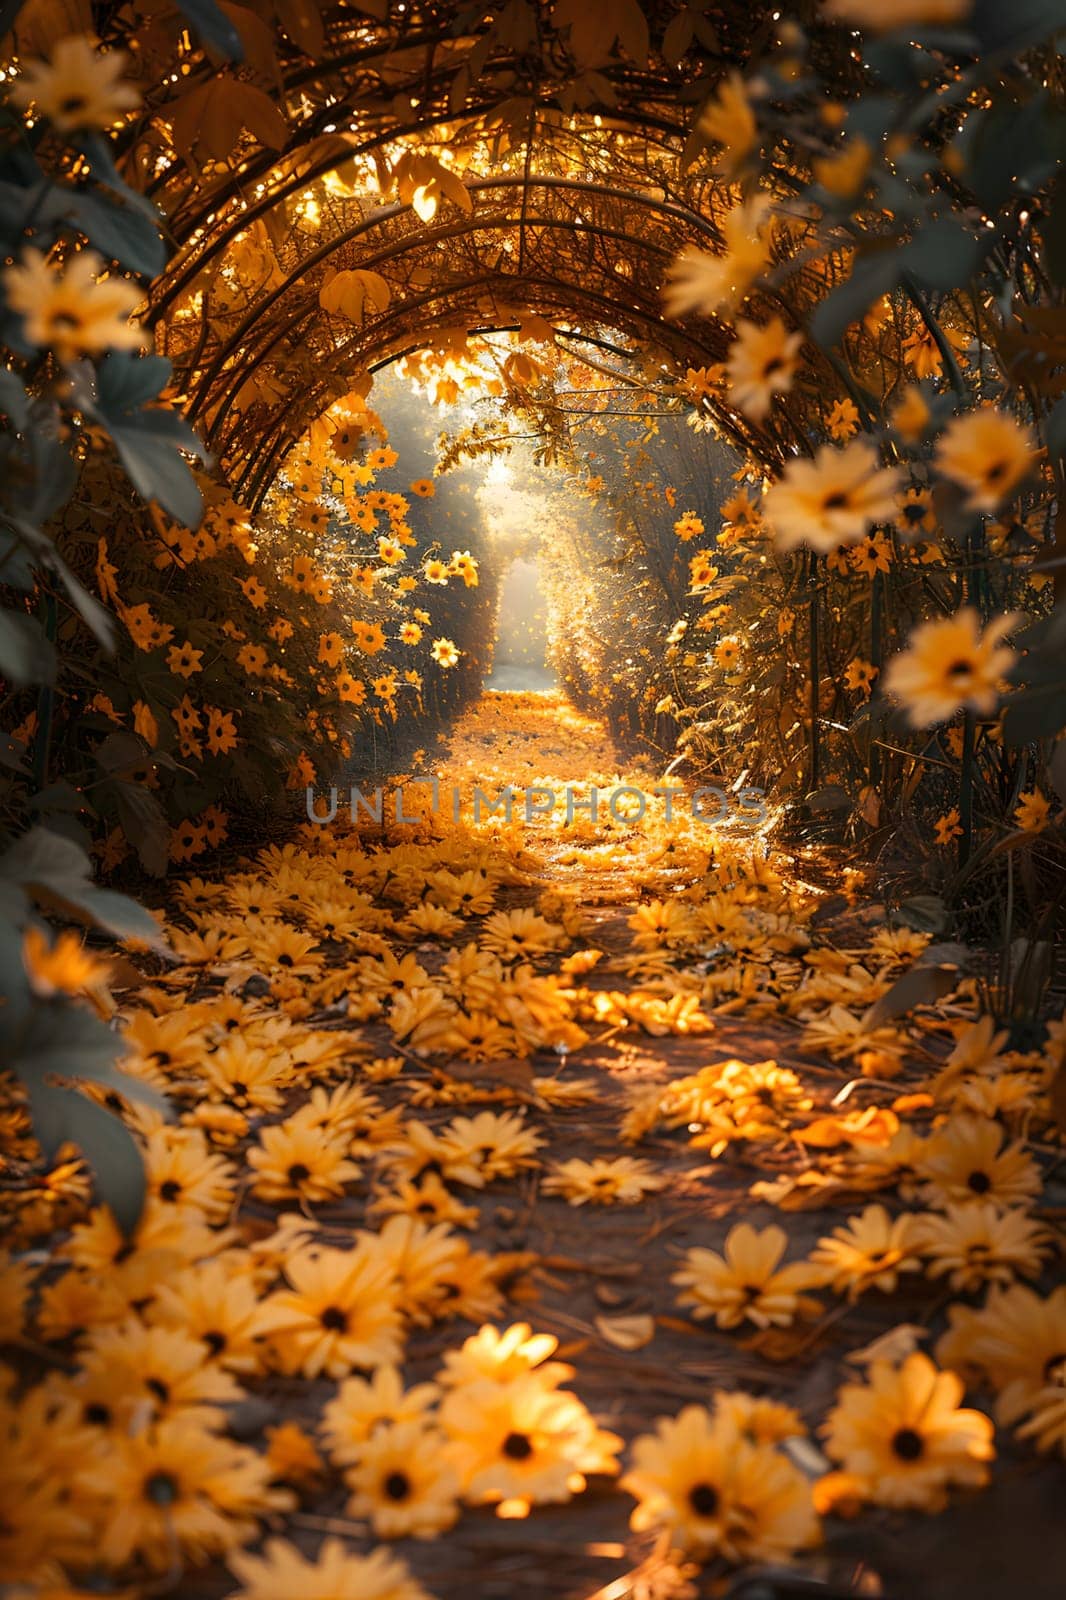 Natures art a tunnel of yellow flowers and leaves under the sunlight by Nadtochiy